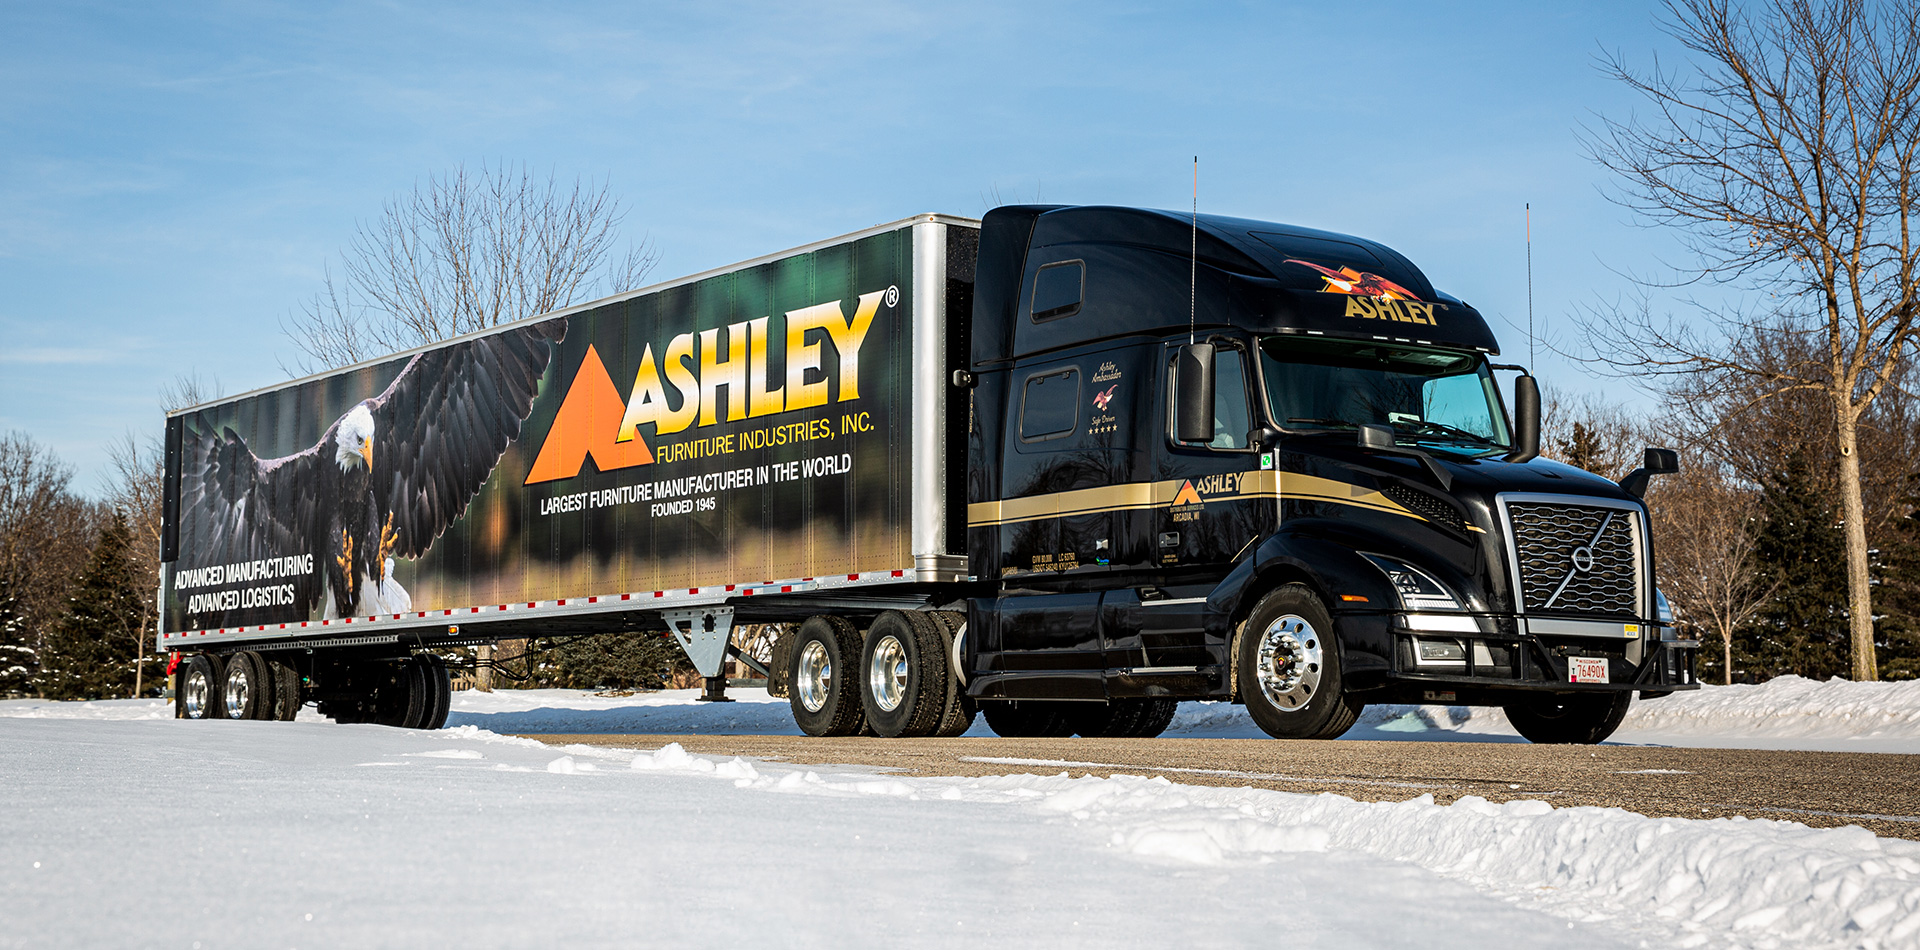 How Much Does Ashley Furniture Charge For Delivery